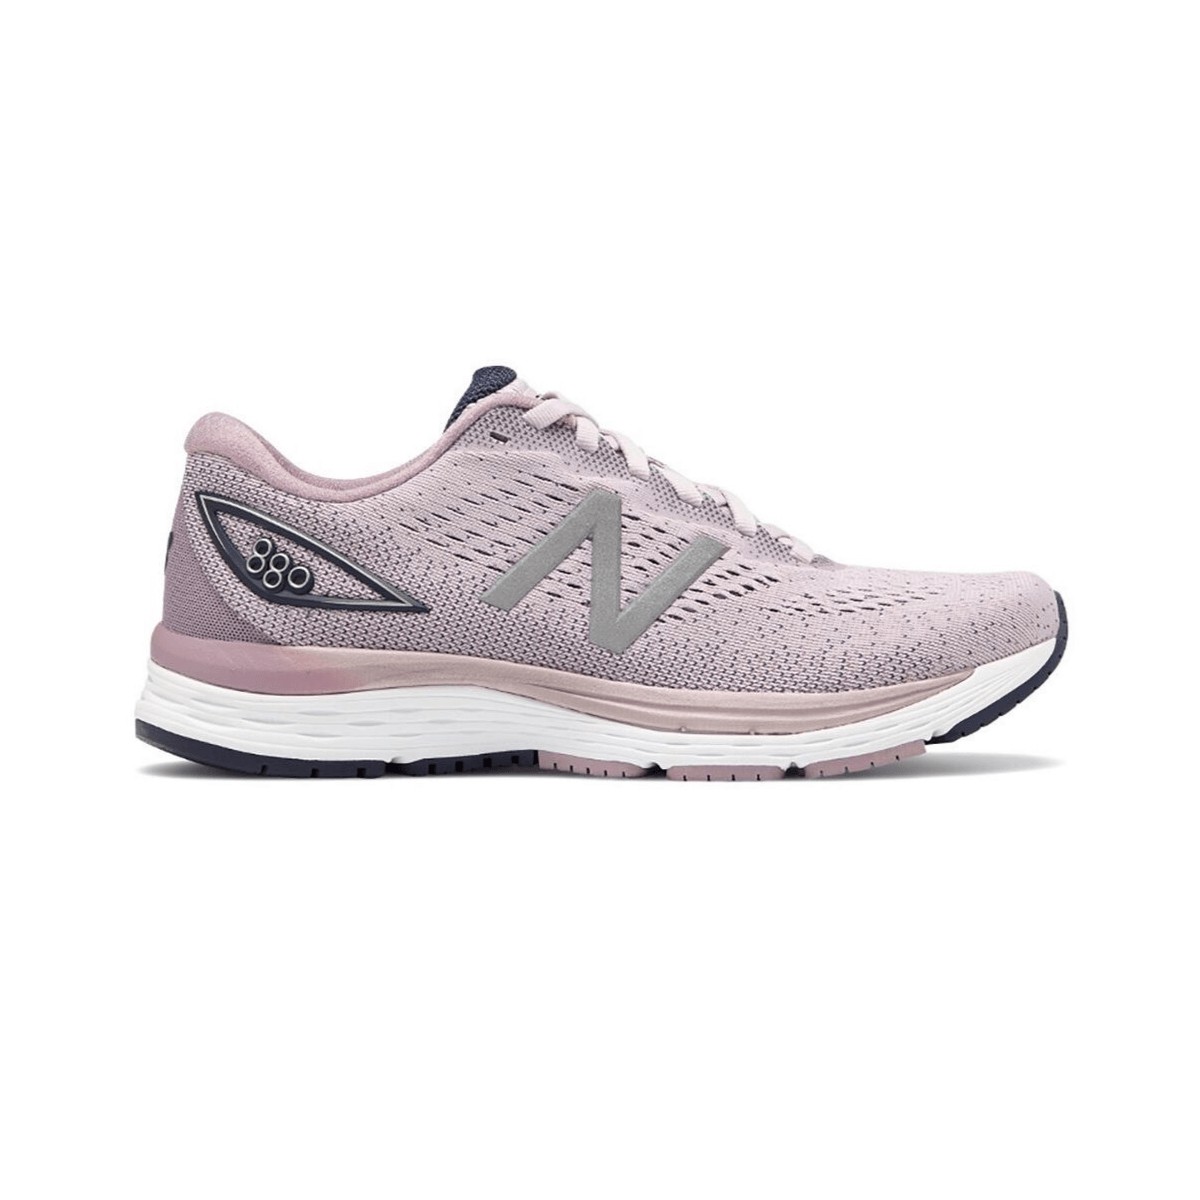 New Balance 880 v9 Women's Running Shoes Cashmere with Pink